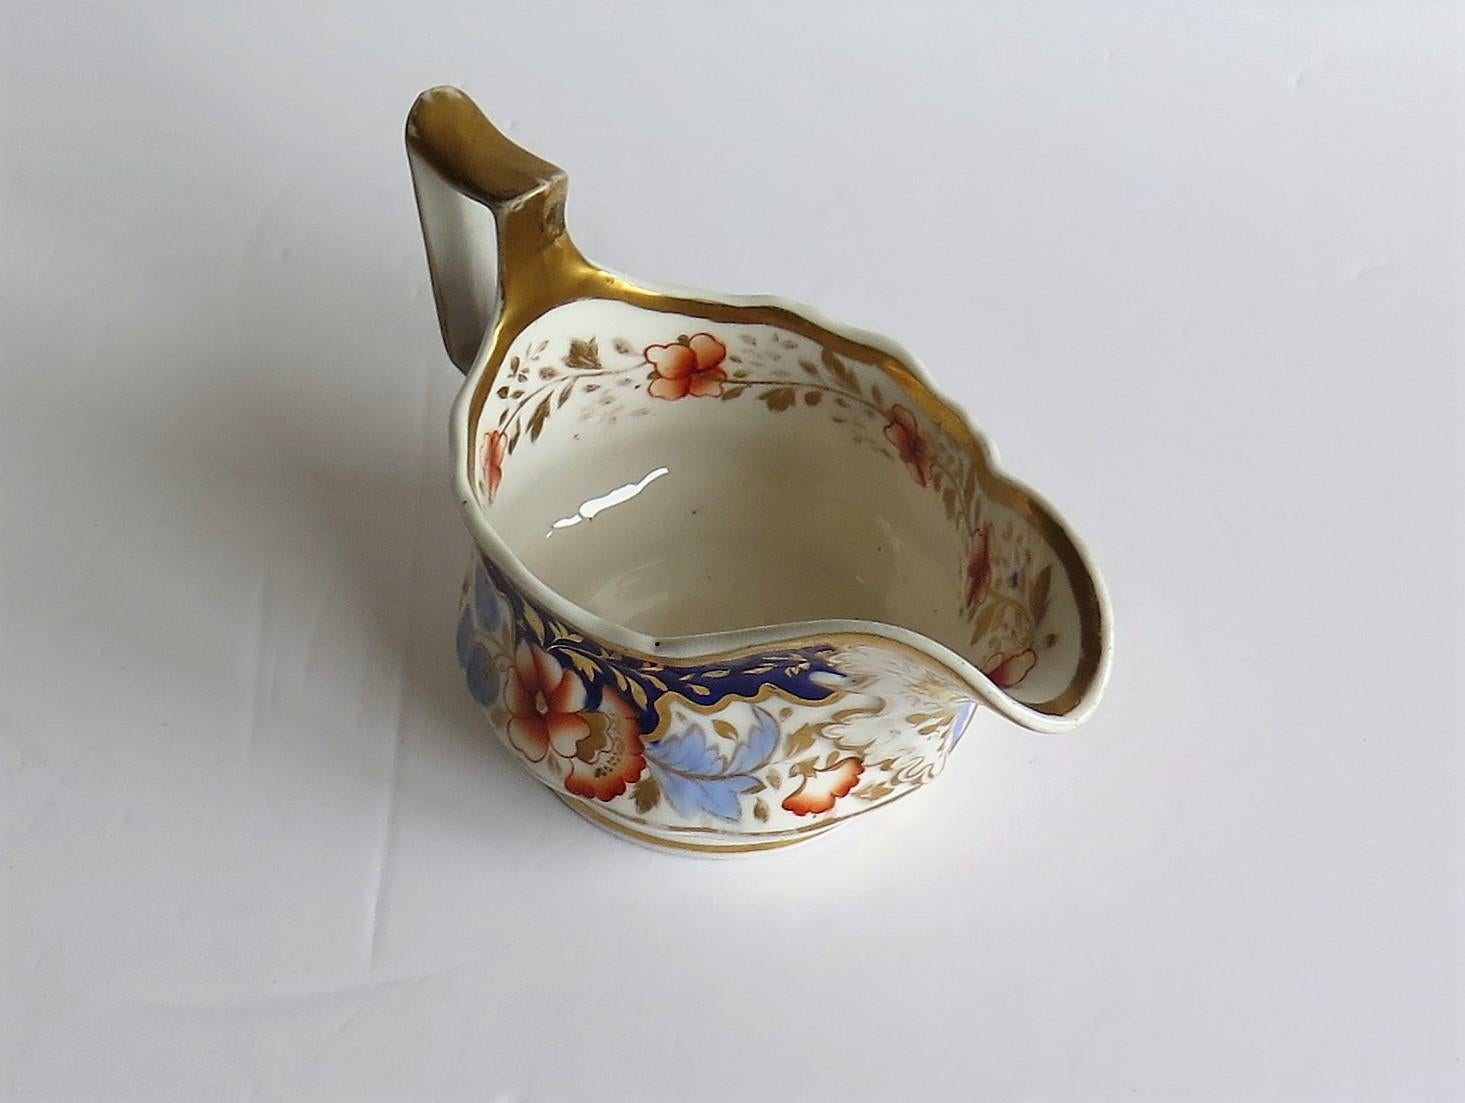 Ridgway Porcelain Milk Jug or Creamer Pattern 2/1005, Regency Period, circa 1825 In Good Condition For Sale In Lincoln, Lincolnshire